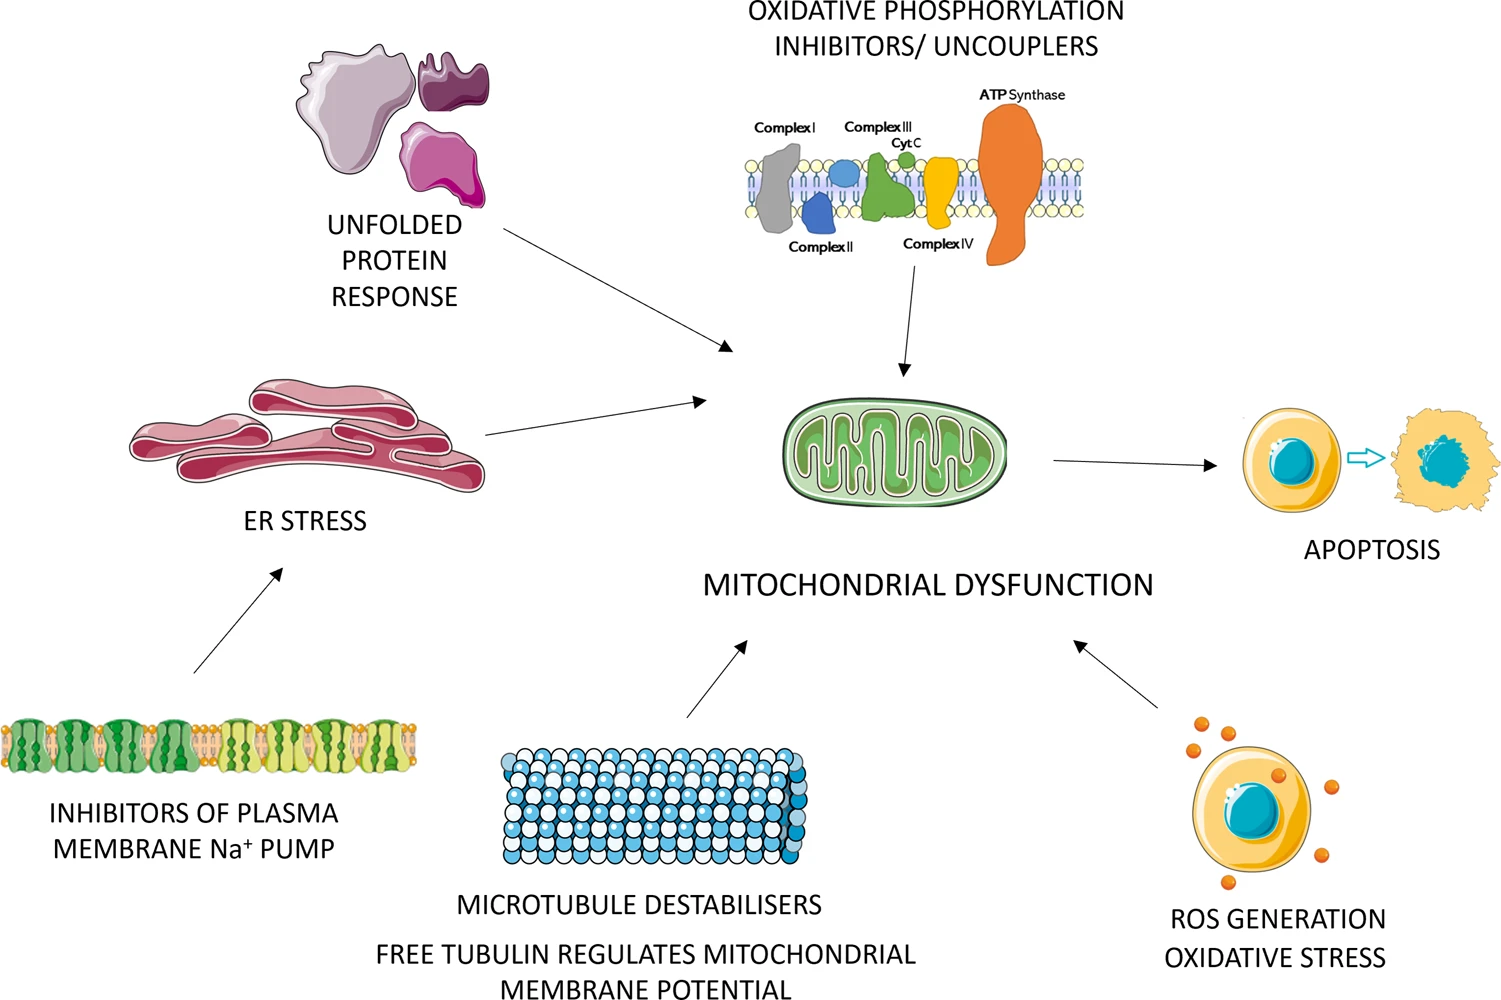 Integrating Cell Morphology with Gene Expression and Chemical Structure to aid Mitochondrial Toxicity detection